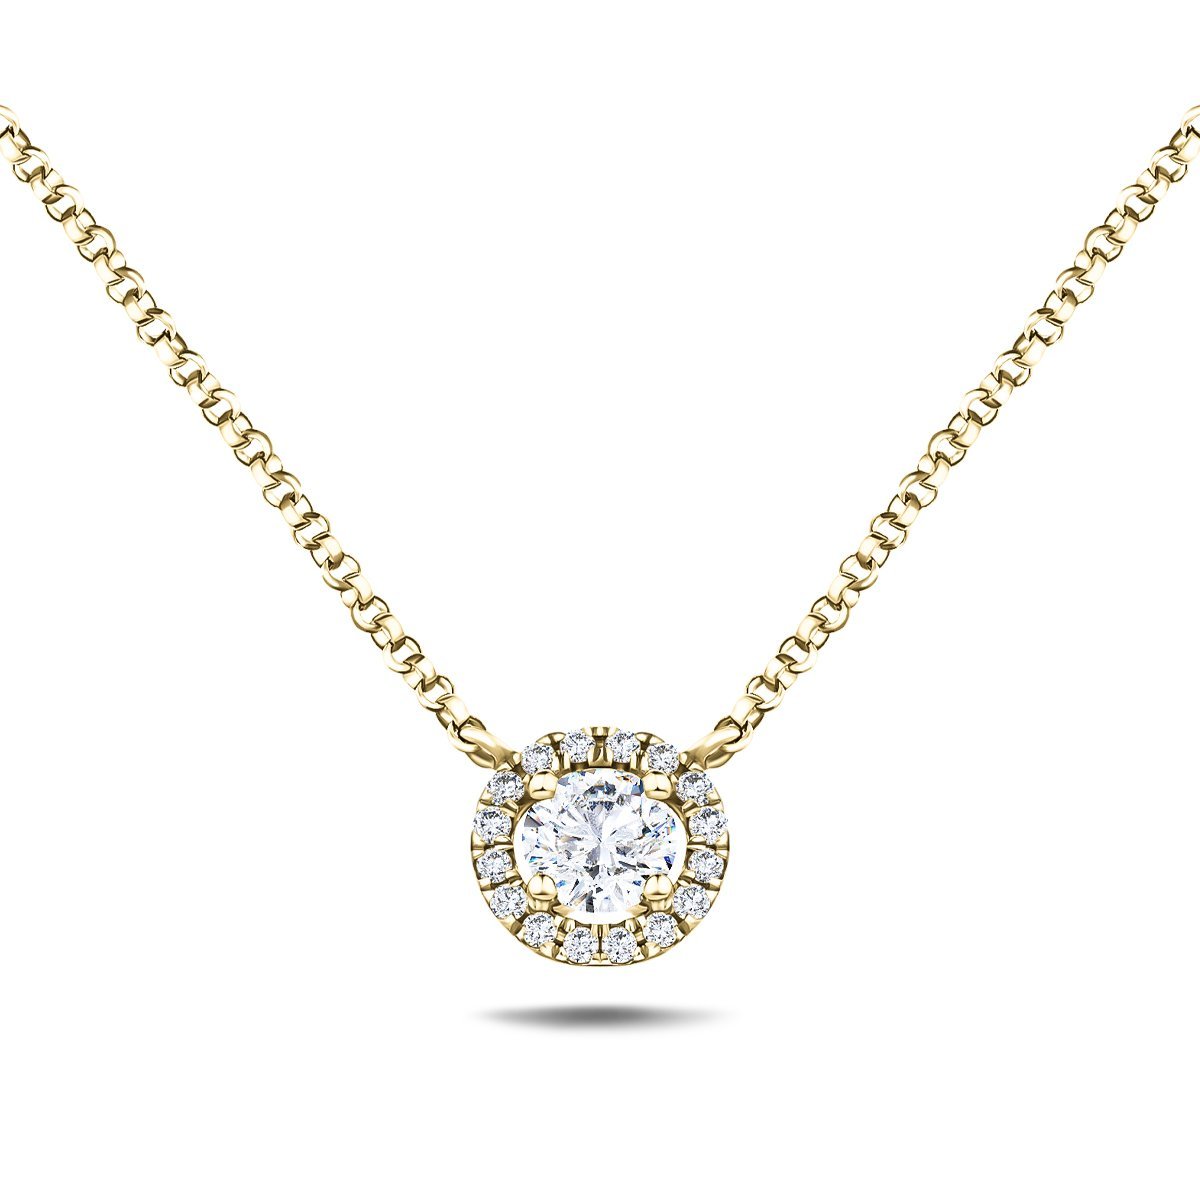 Diamond Halo Pendant Necklace 0.38ct G/SI Quality in 18k Yellow Gold - All Diamond